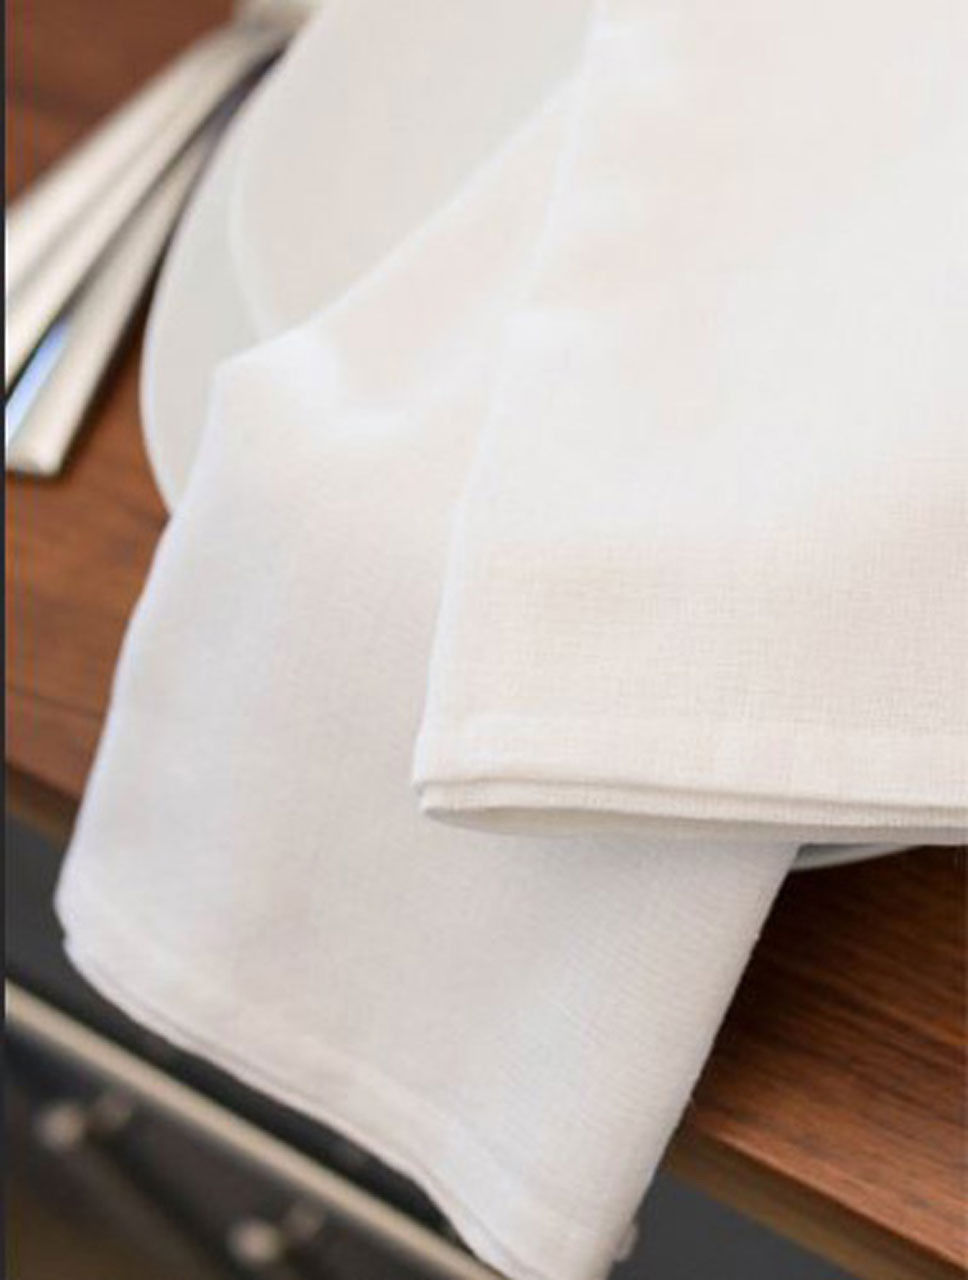 What materials compose the 100% Cotton Huck Towel and what distinguishes its features?